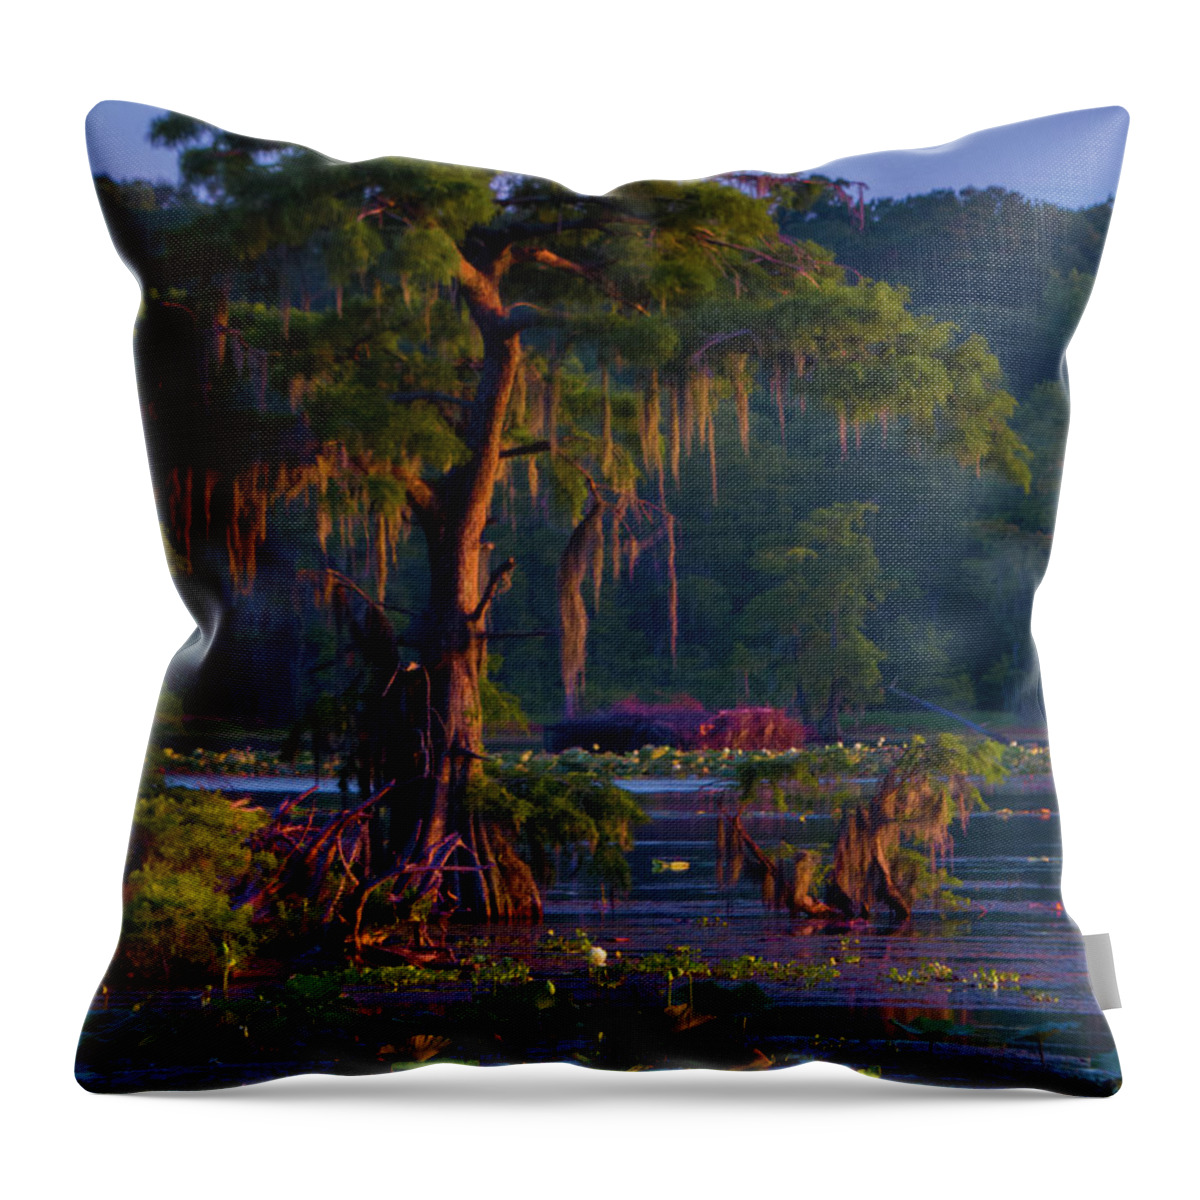 Orcinus Fotograffy Throw Pillow featuring the photograph Cypress In The Sunset by Kimo Fernandez